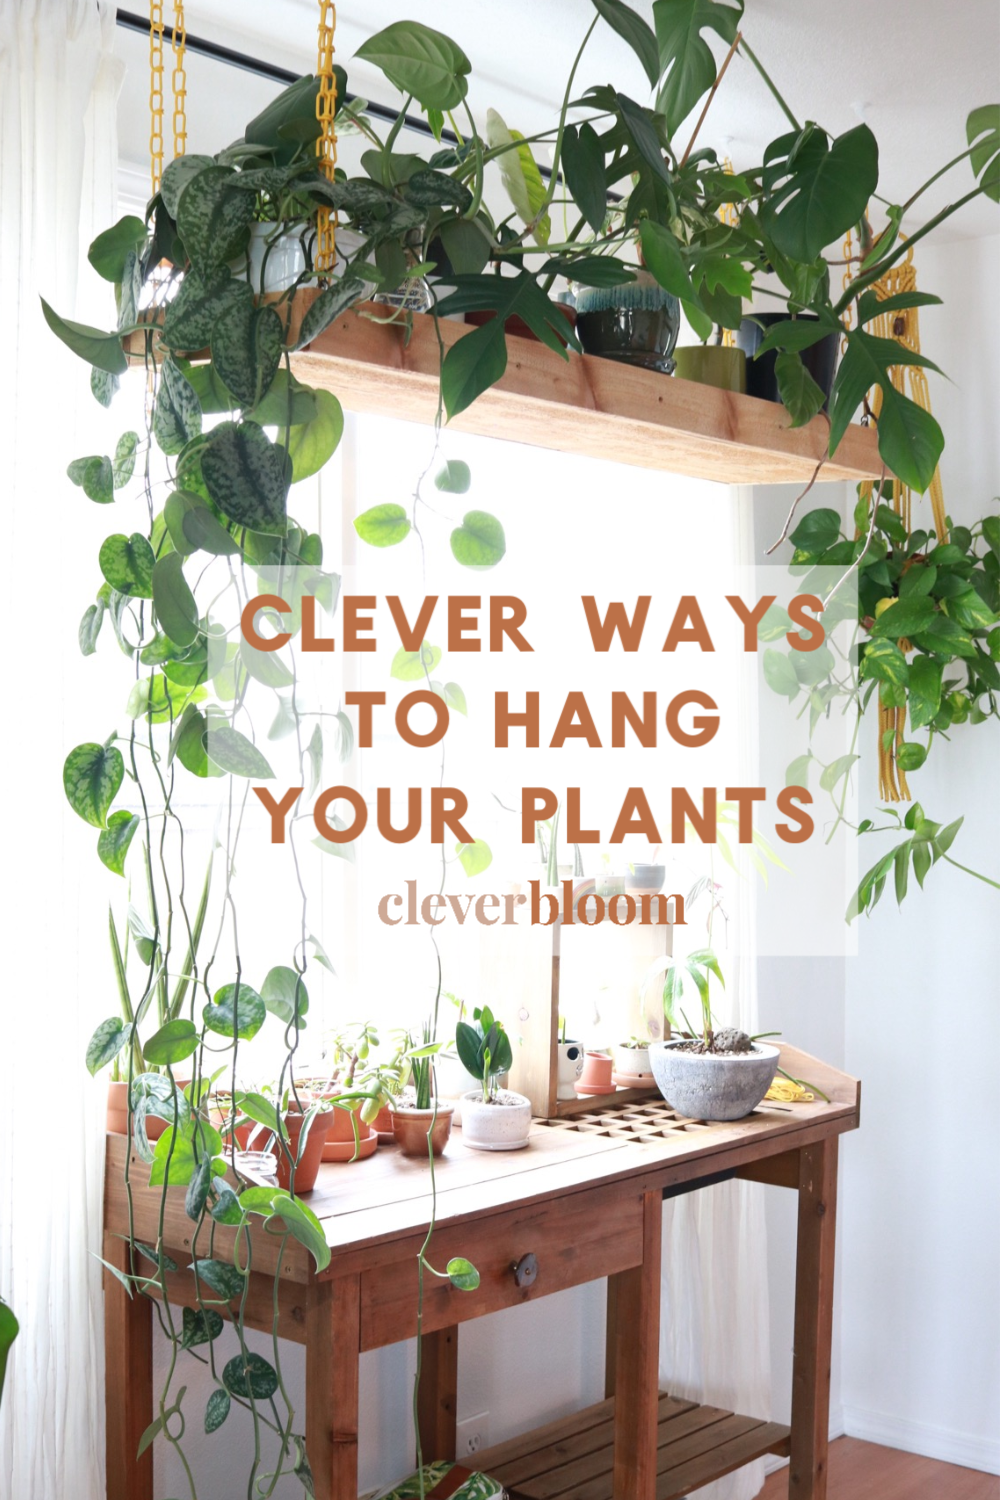 Clever Ways To Hang Your Plants -   16 plants Hanging crafts ideas